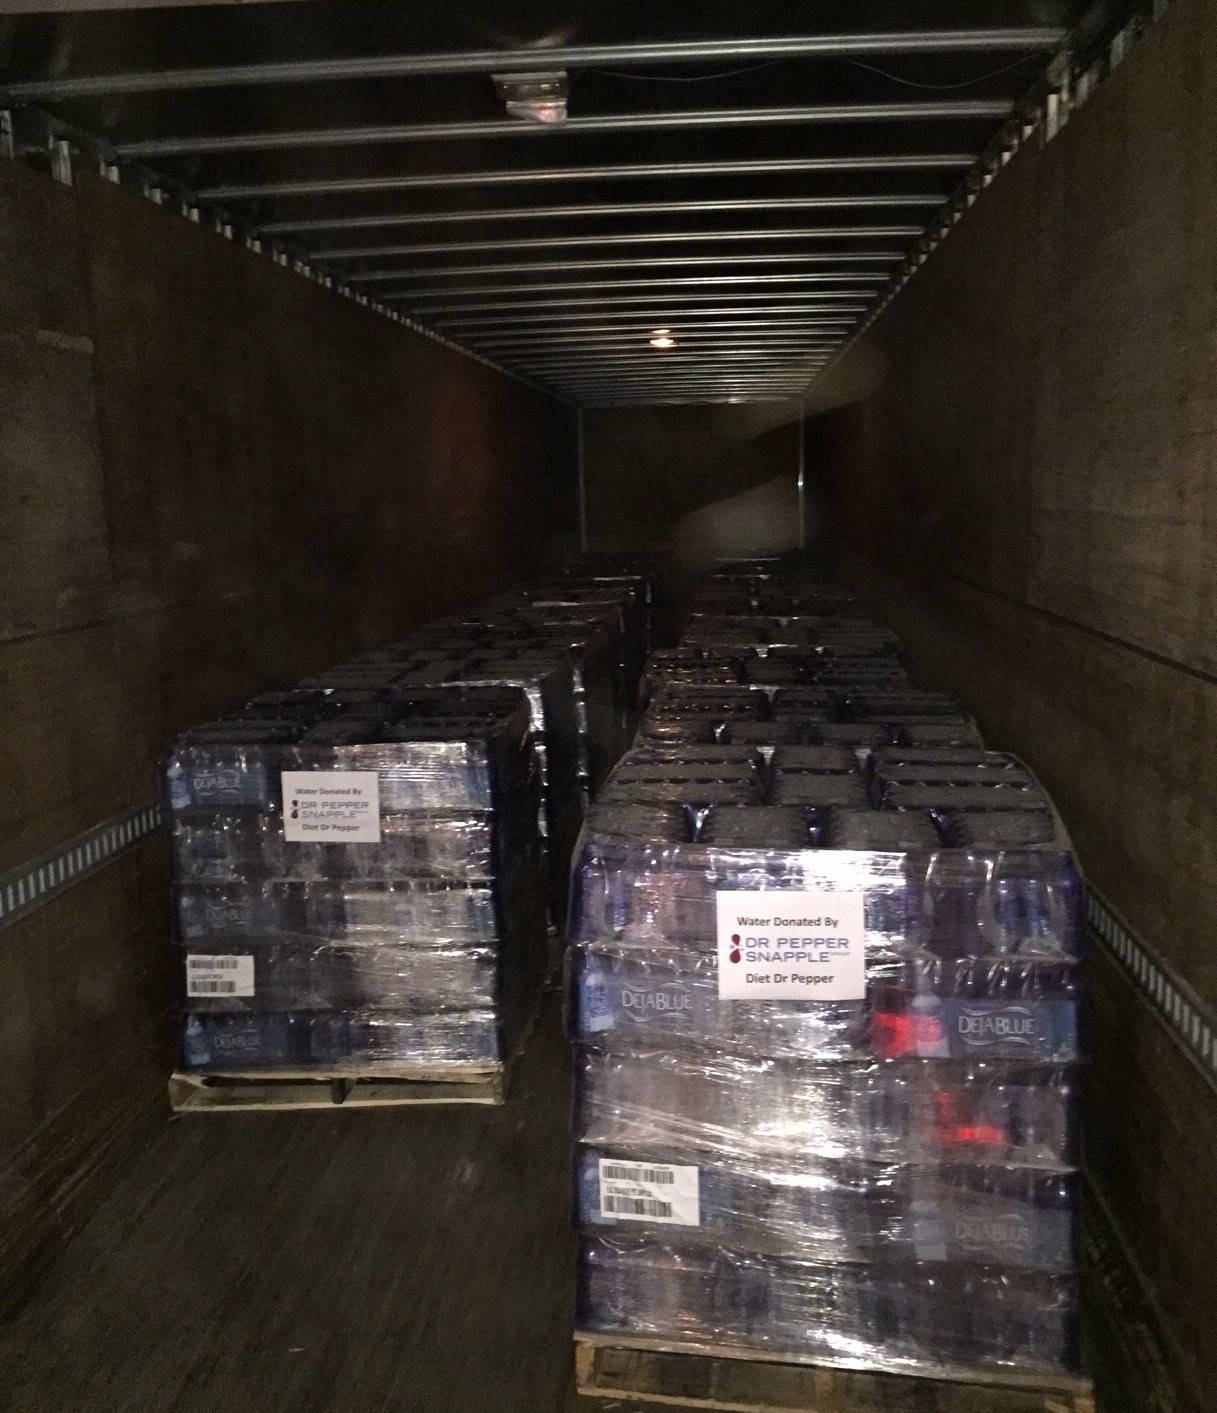 PHOTO:Dr Pepper Snapple Group donates 41,000 bottles of water to Flint, Michigan at woman's request in exchange for her @DietDrPepper Twitter account. 